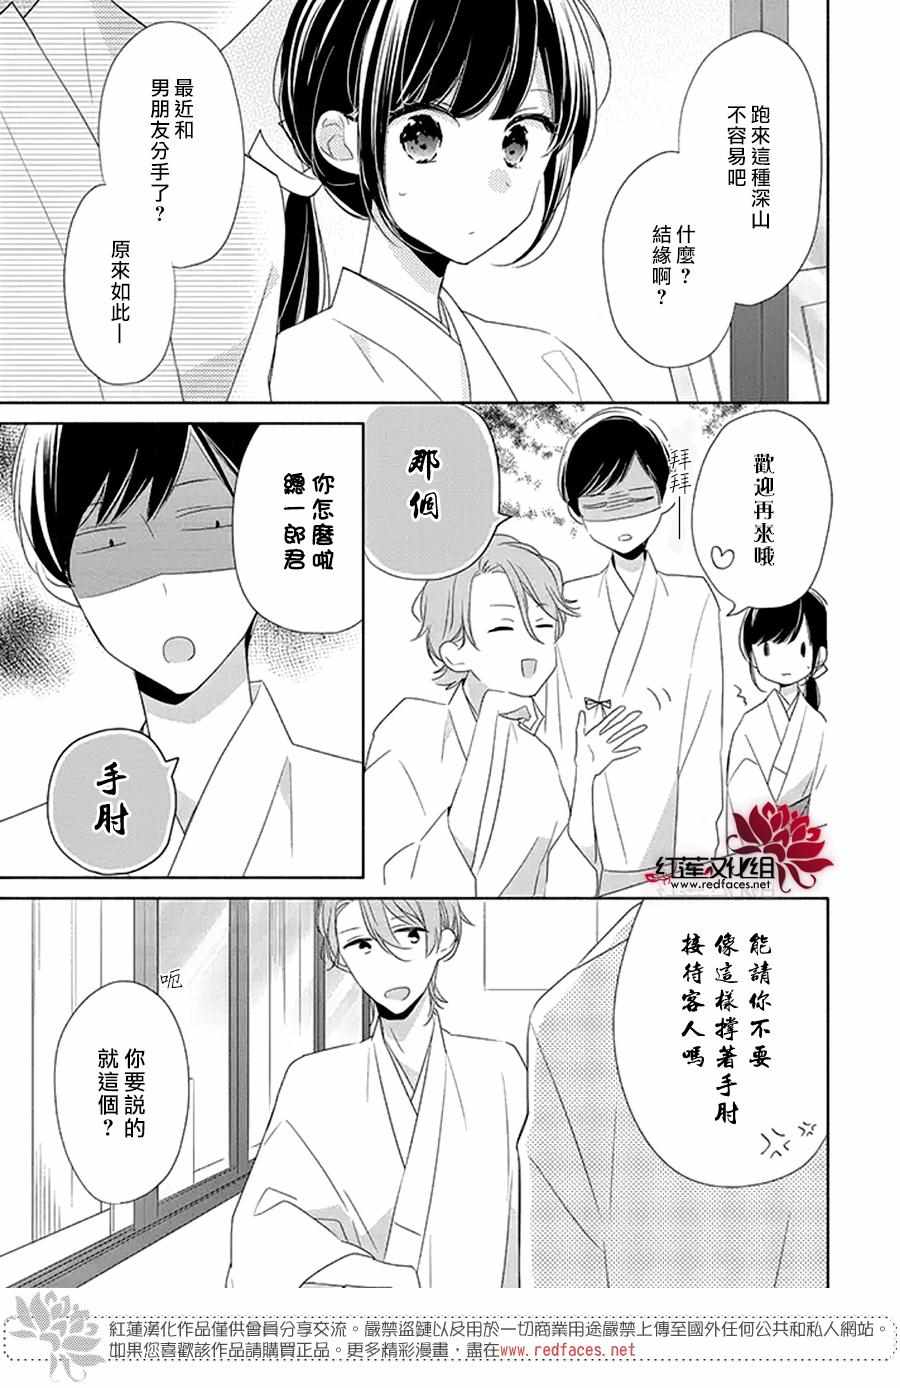 If given a second chance - 22話 - 3